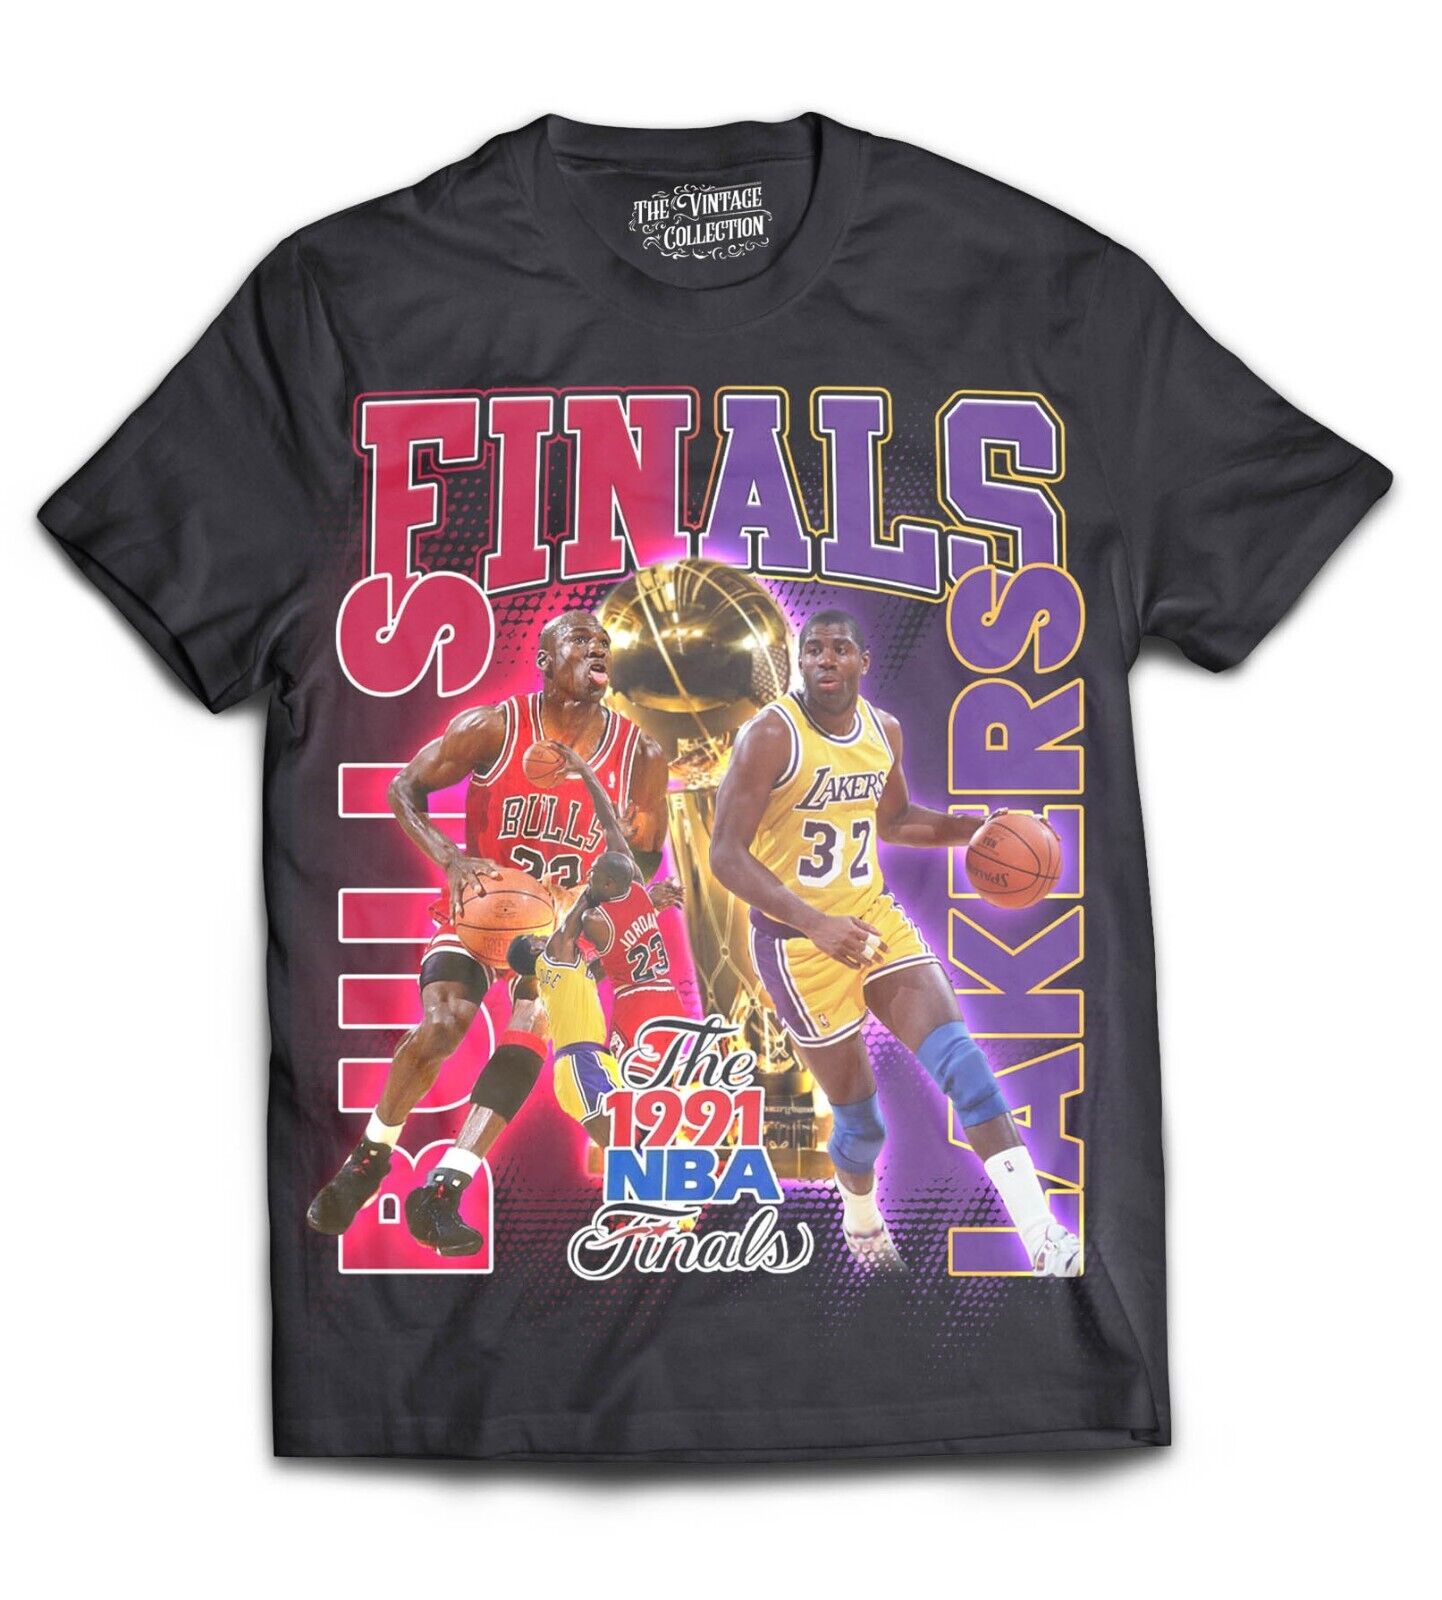 1991 Finals T-Shirt Vintage Edition bulls lakers limited 100% cotton new